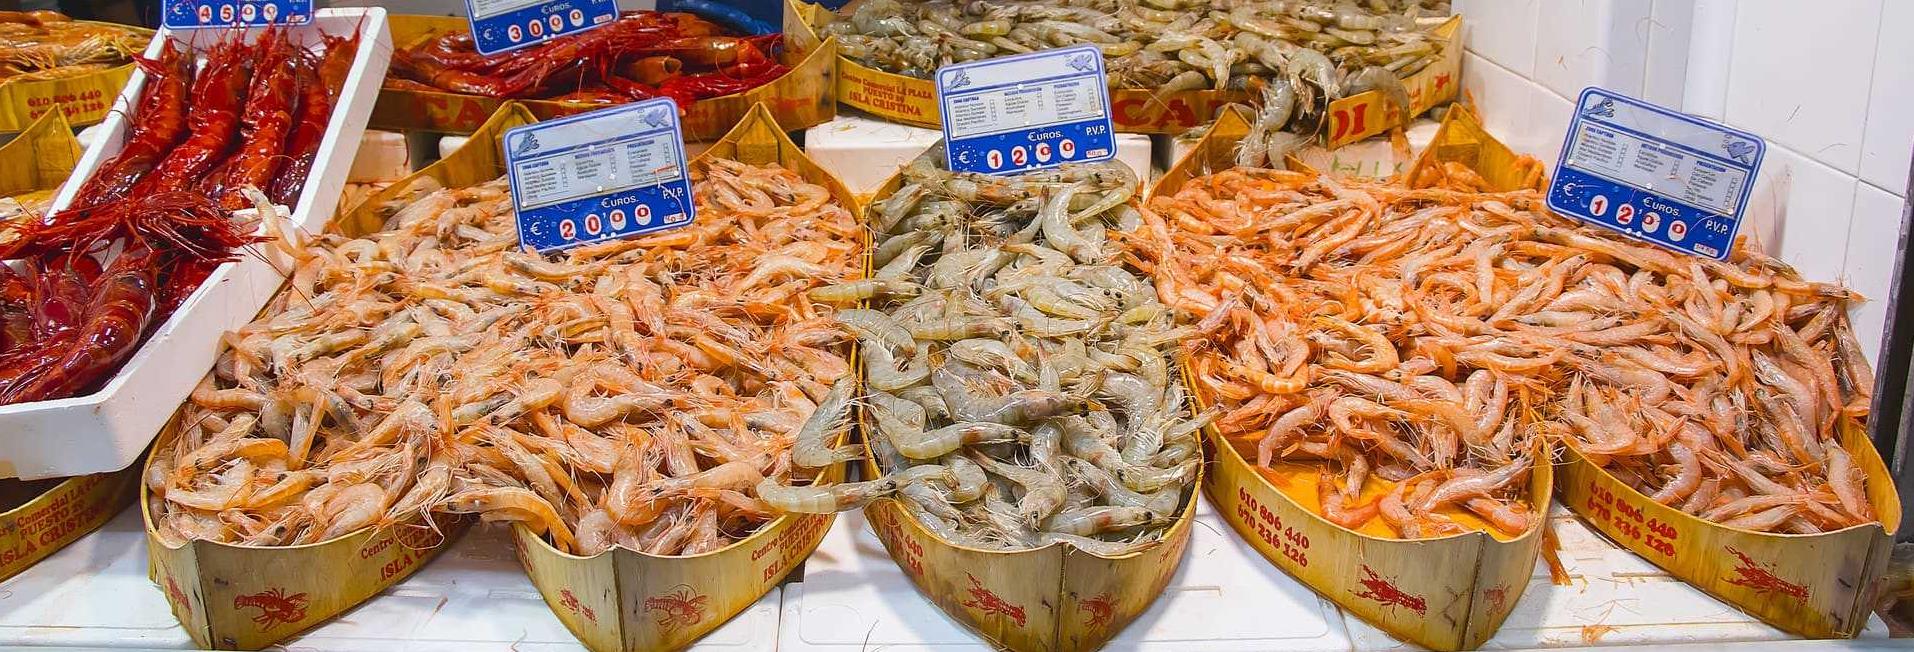 The white prawn from Huelva, the red garrucha prawn, the prawn from Sanlúcar and other seafood delicacies from Andalusia